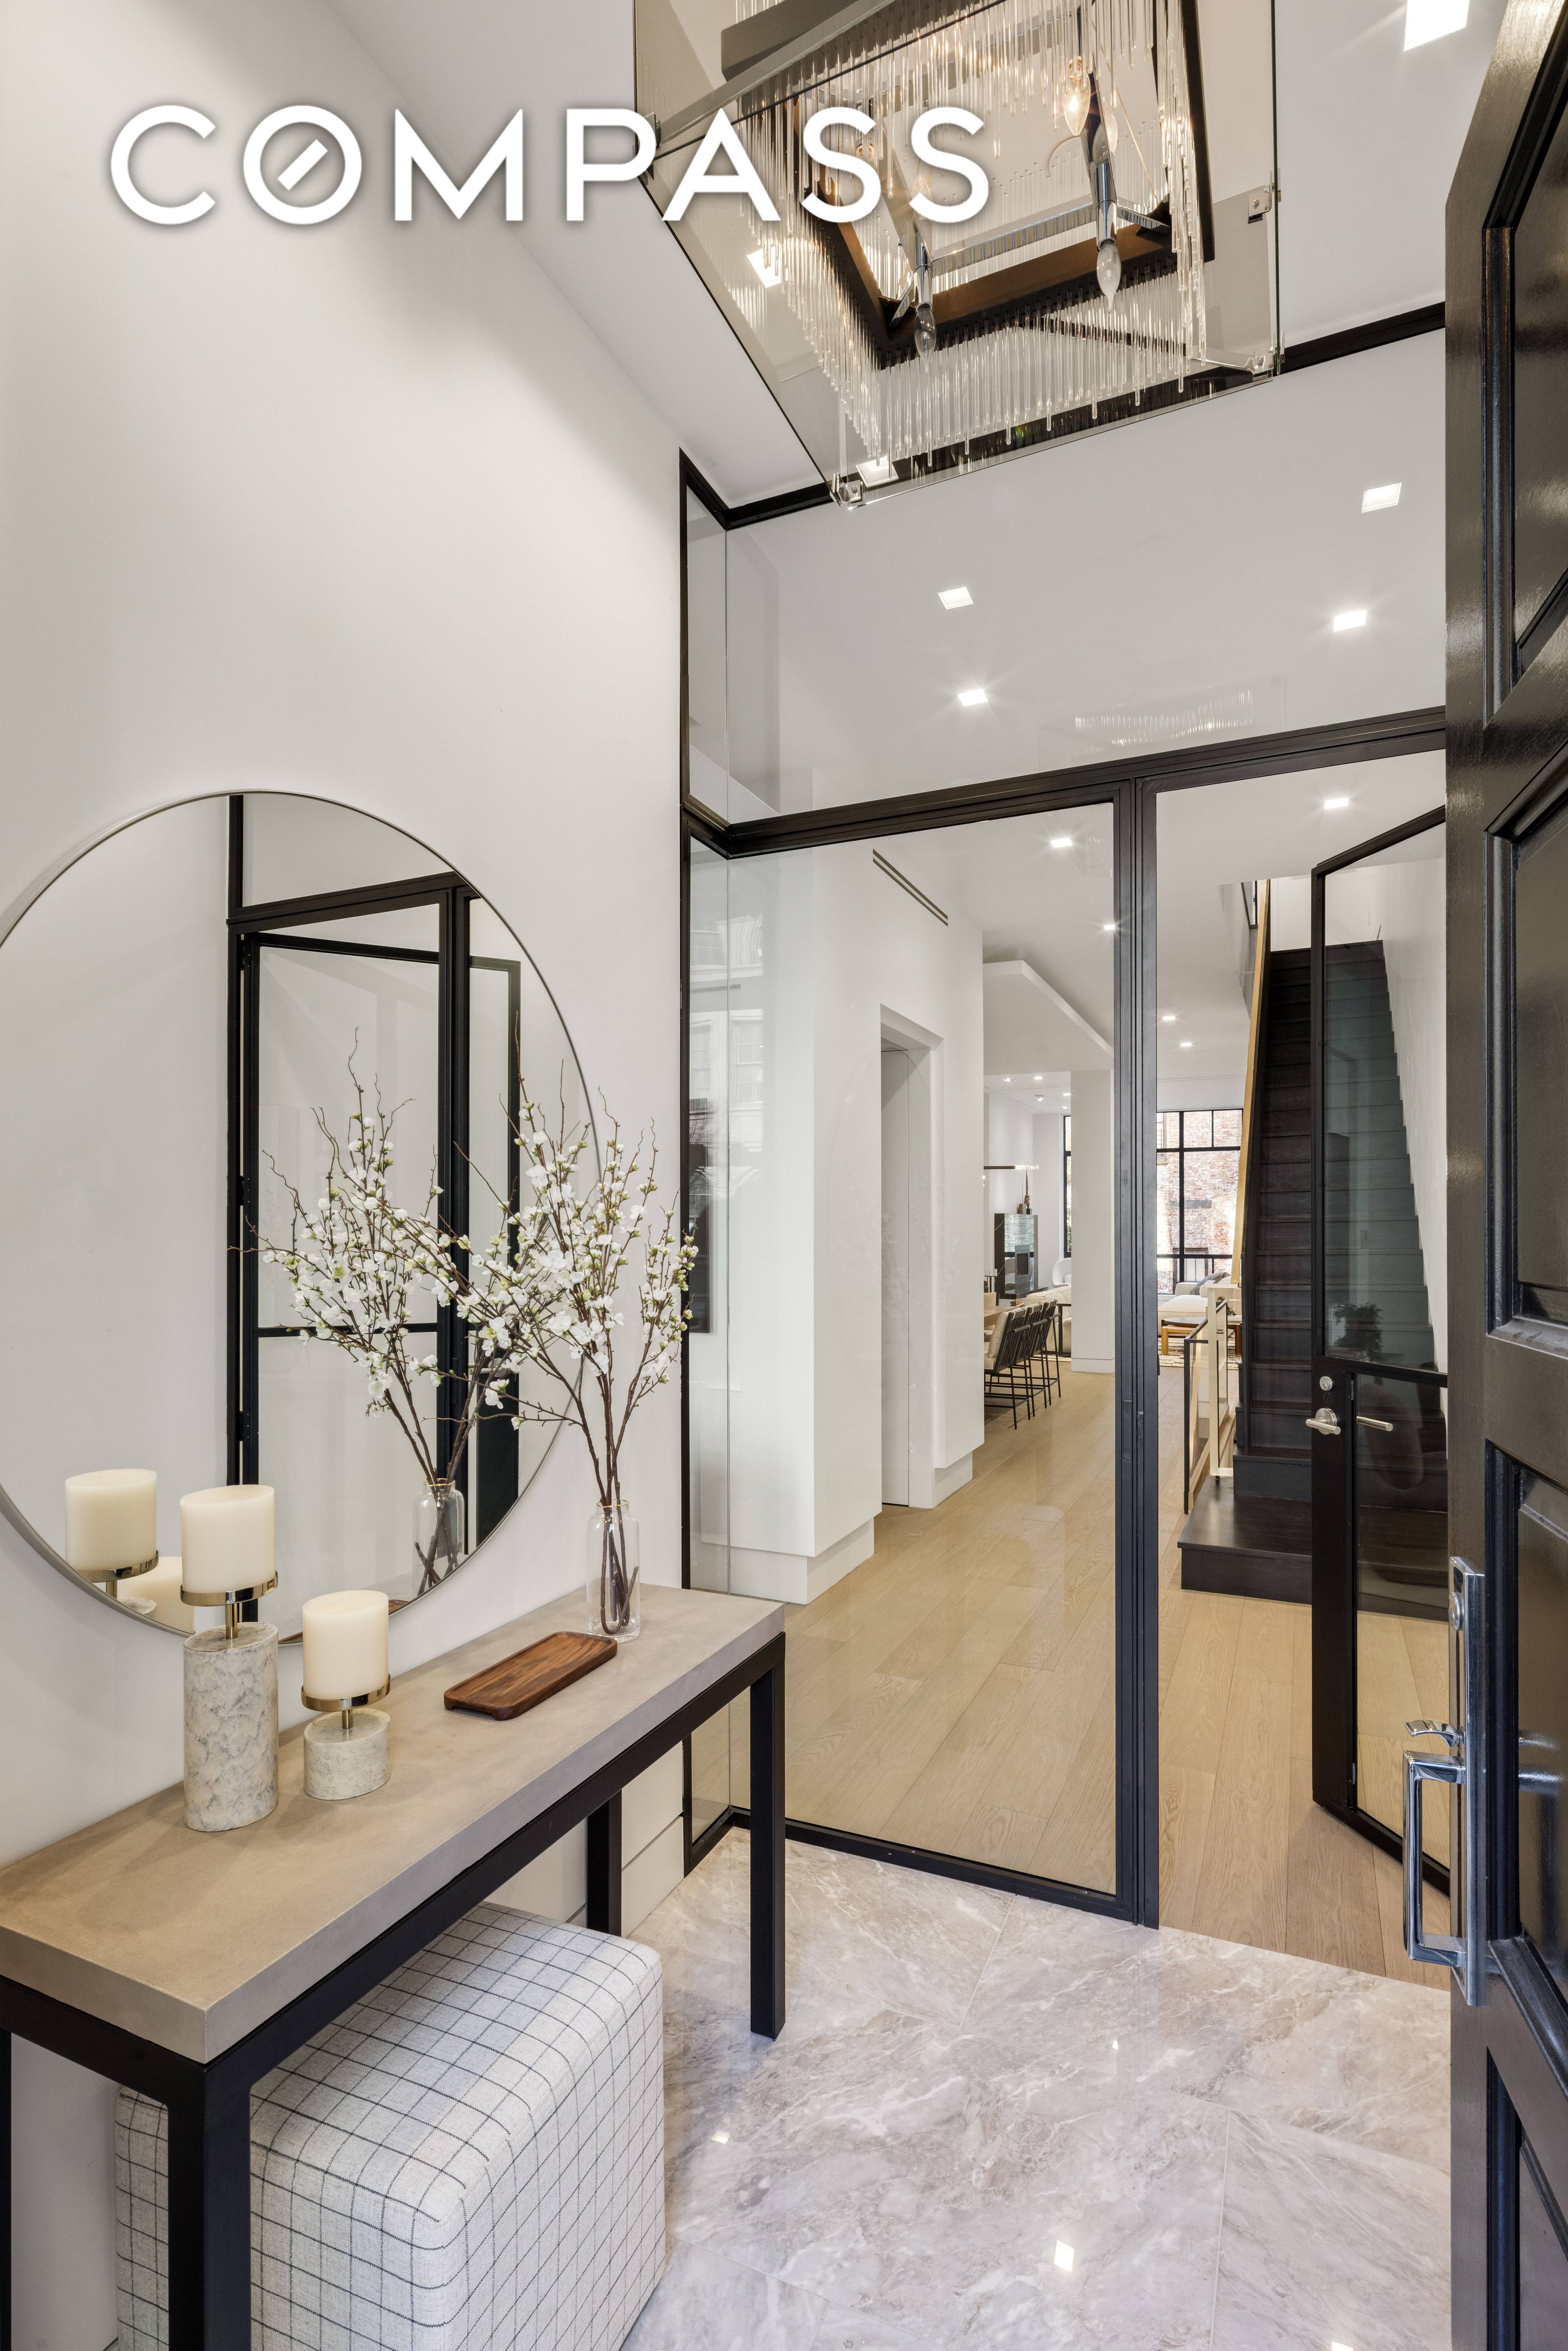 54 East 80th Street presents an extraordinary opportunity to own a meticulously renovated five story 18' wide limestone townhouse.